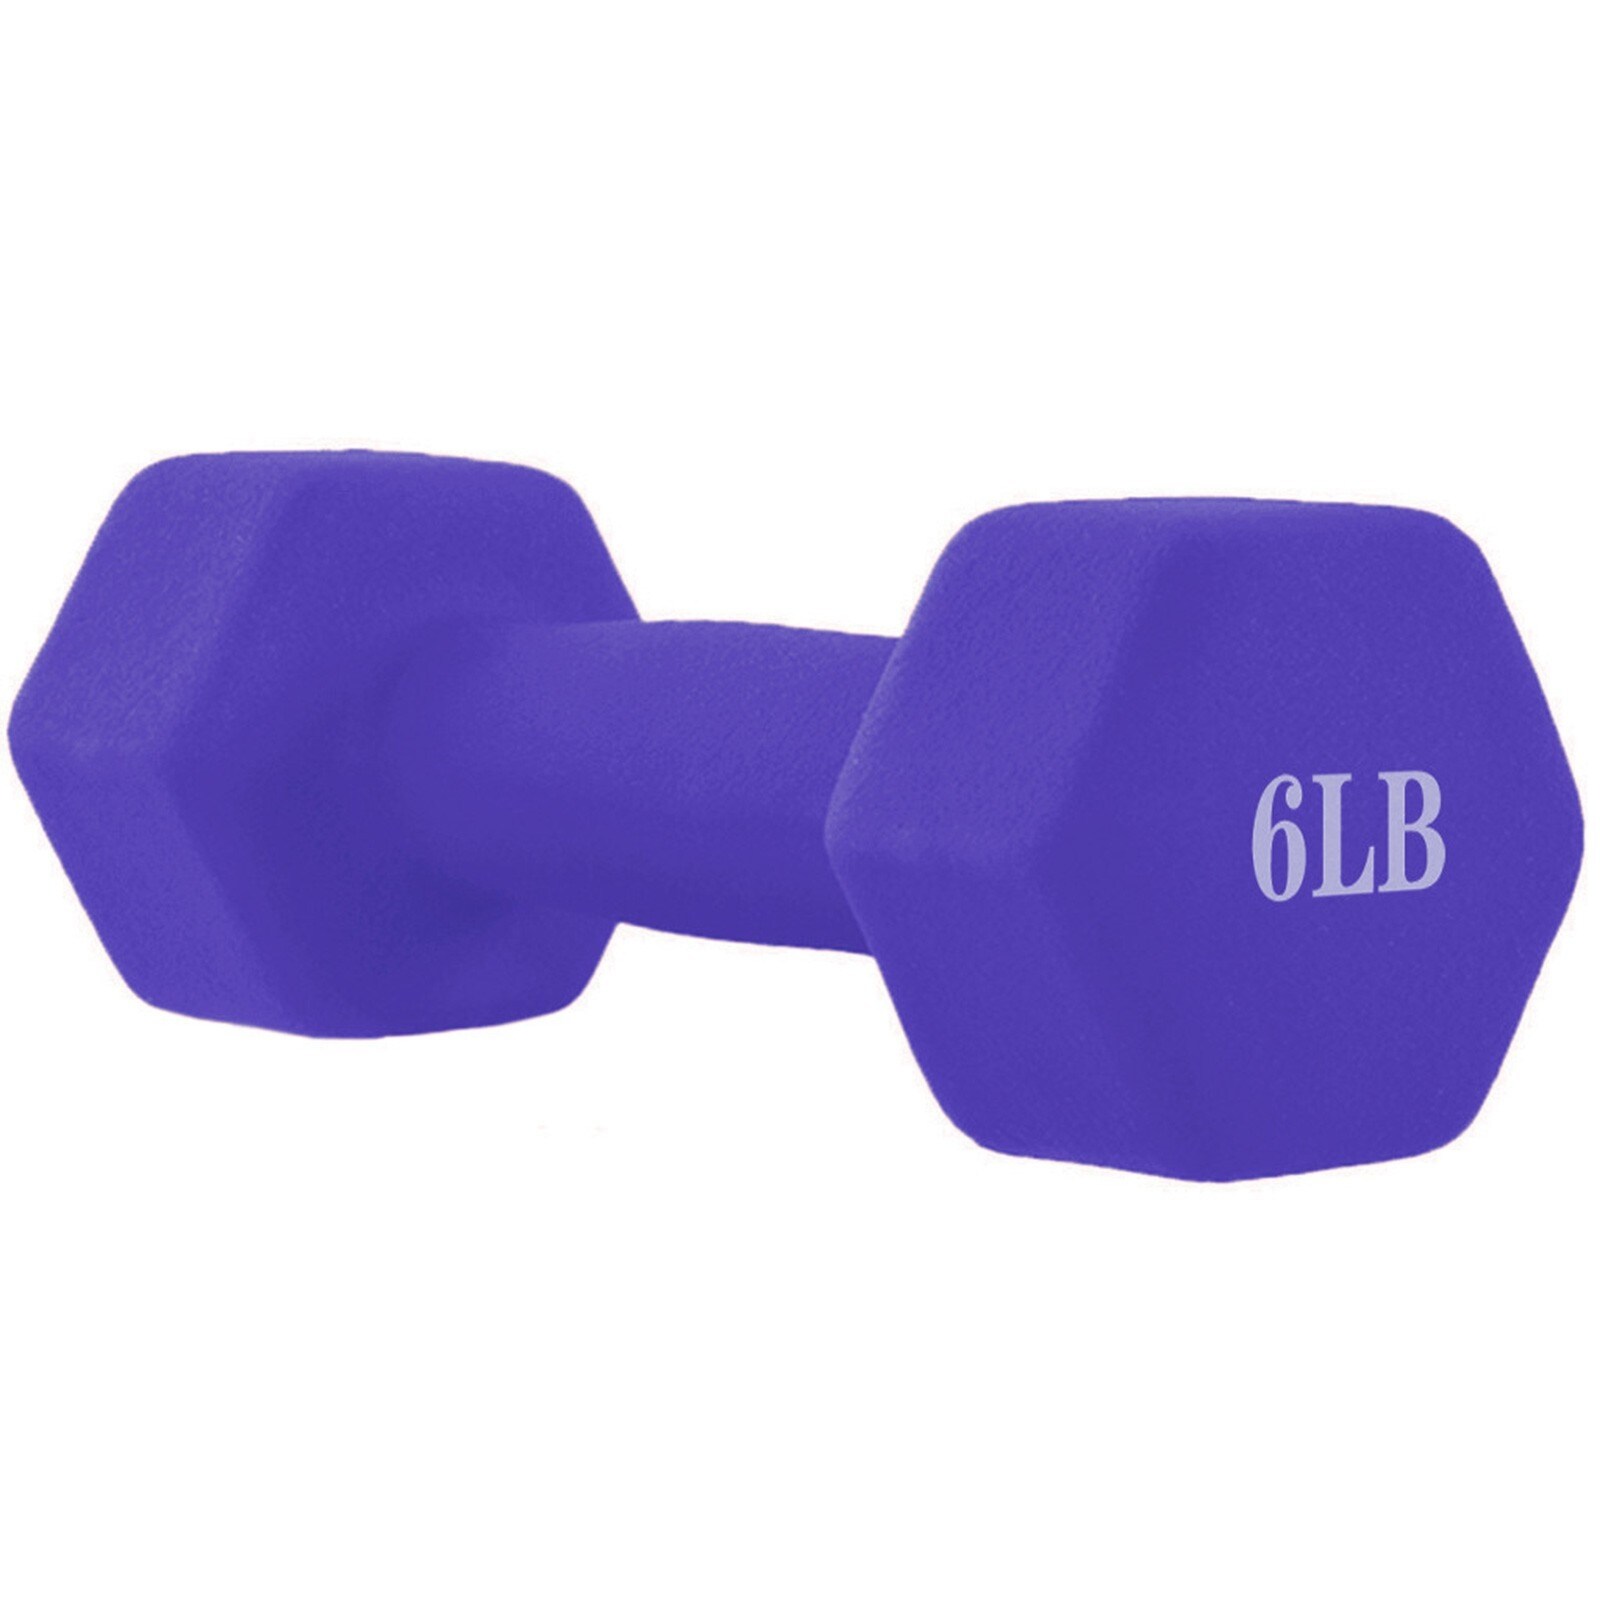 A Pair Dumbbell Barbell Neoprene Coated Weights 6 Pound - Bed Bath & Beyond  - 34862819